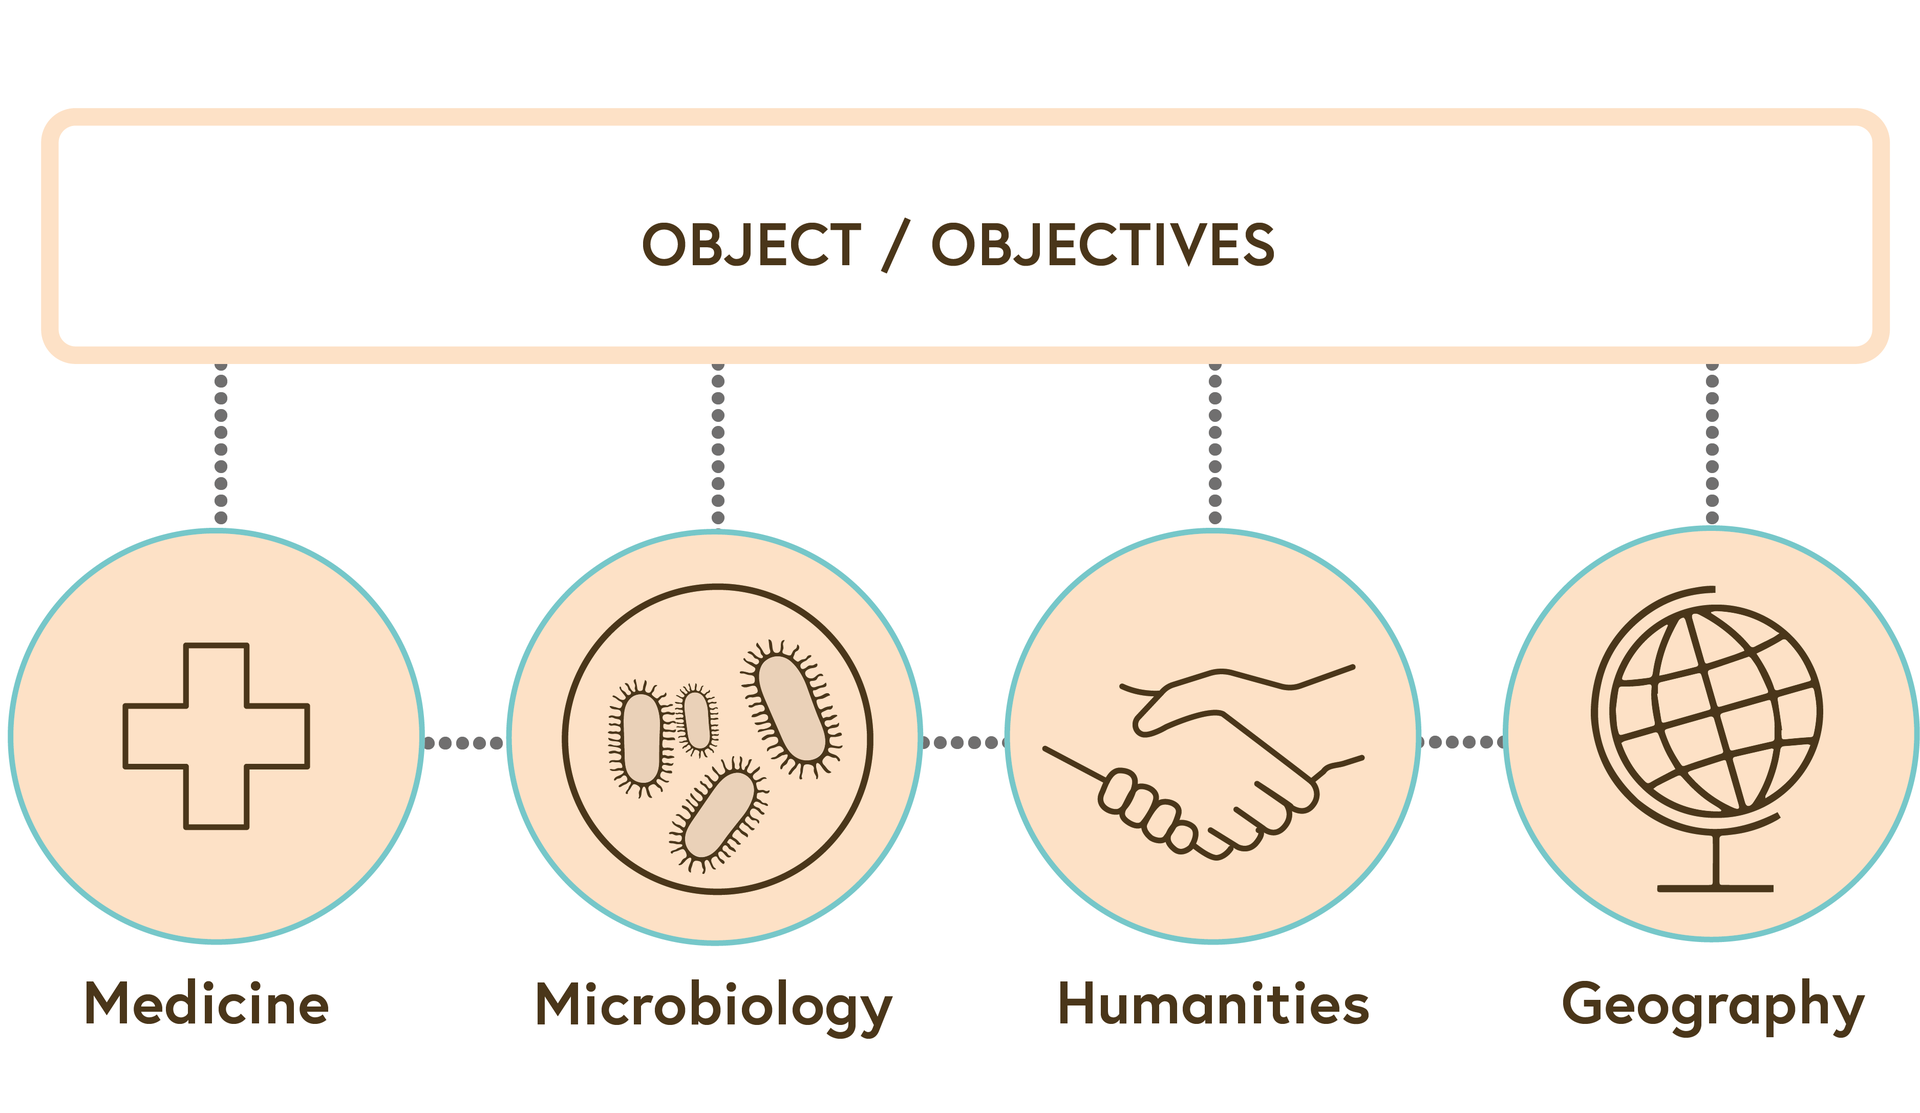 An illustration showing the integrative collaboration between the four disciplines addressing the same object/objective. Concepts are exchanged between the disciplines.